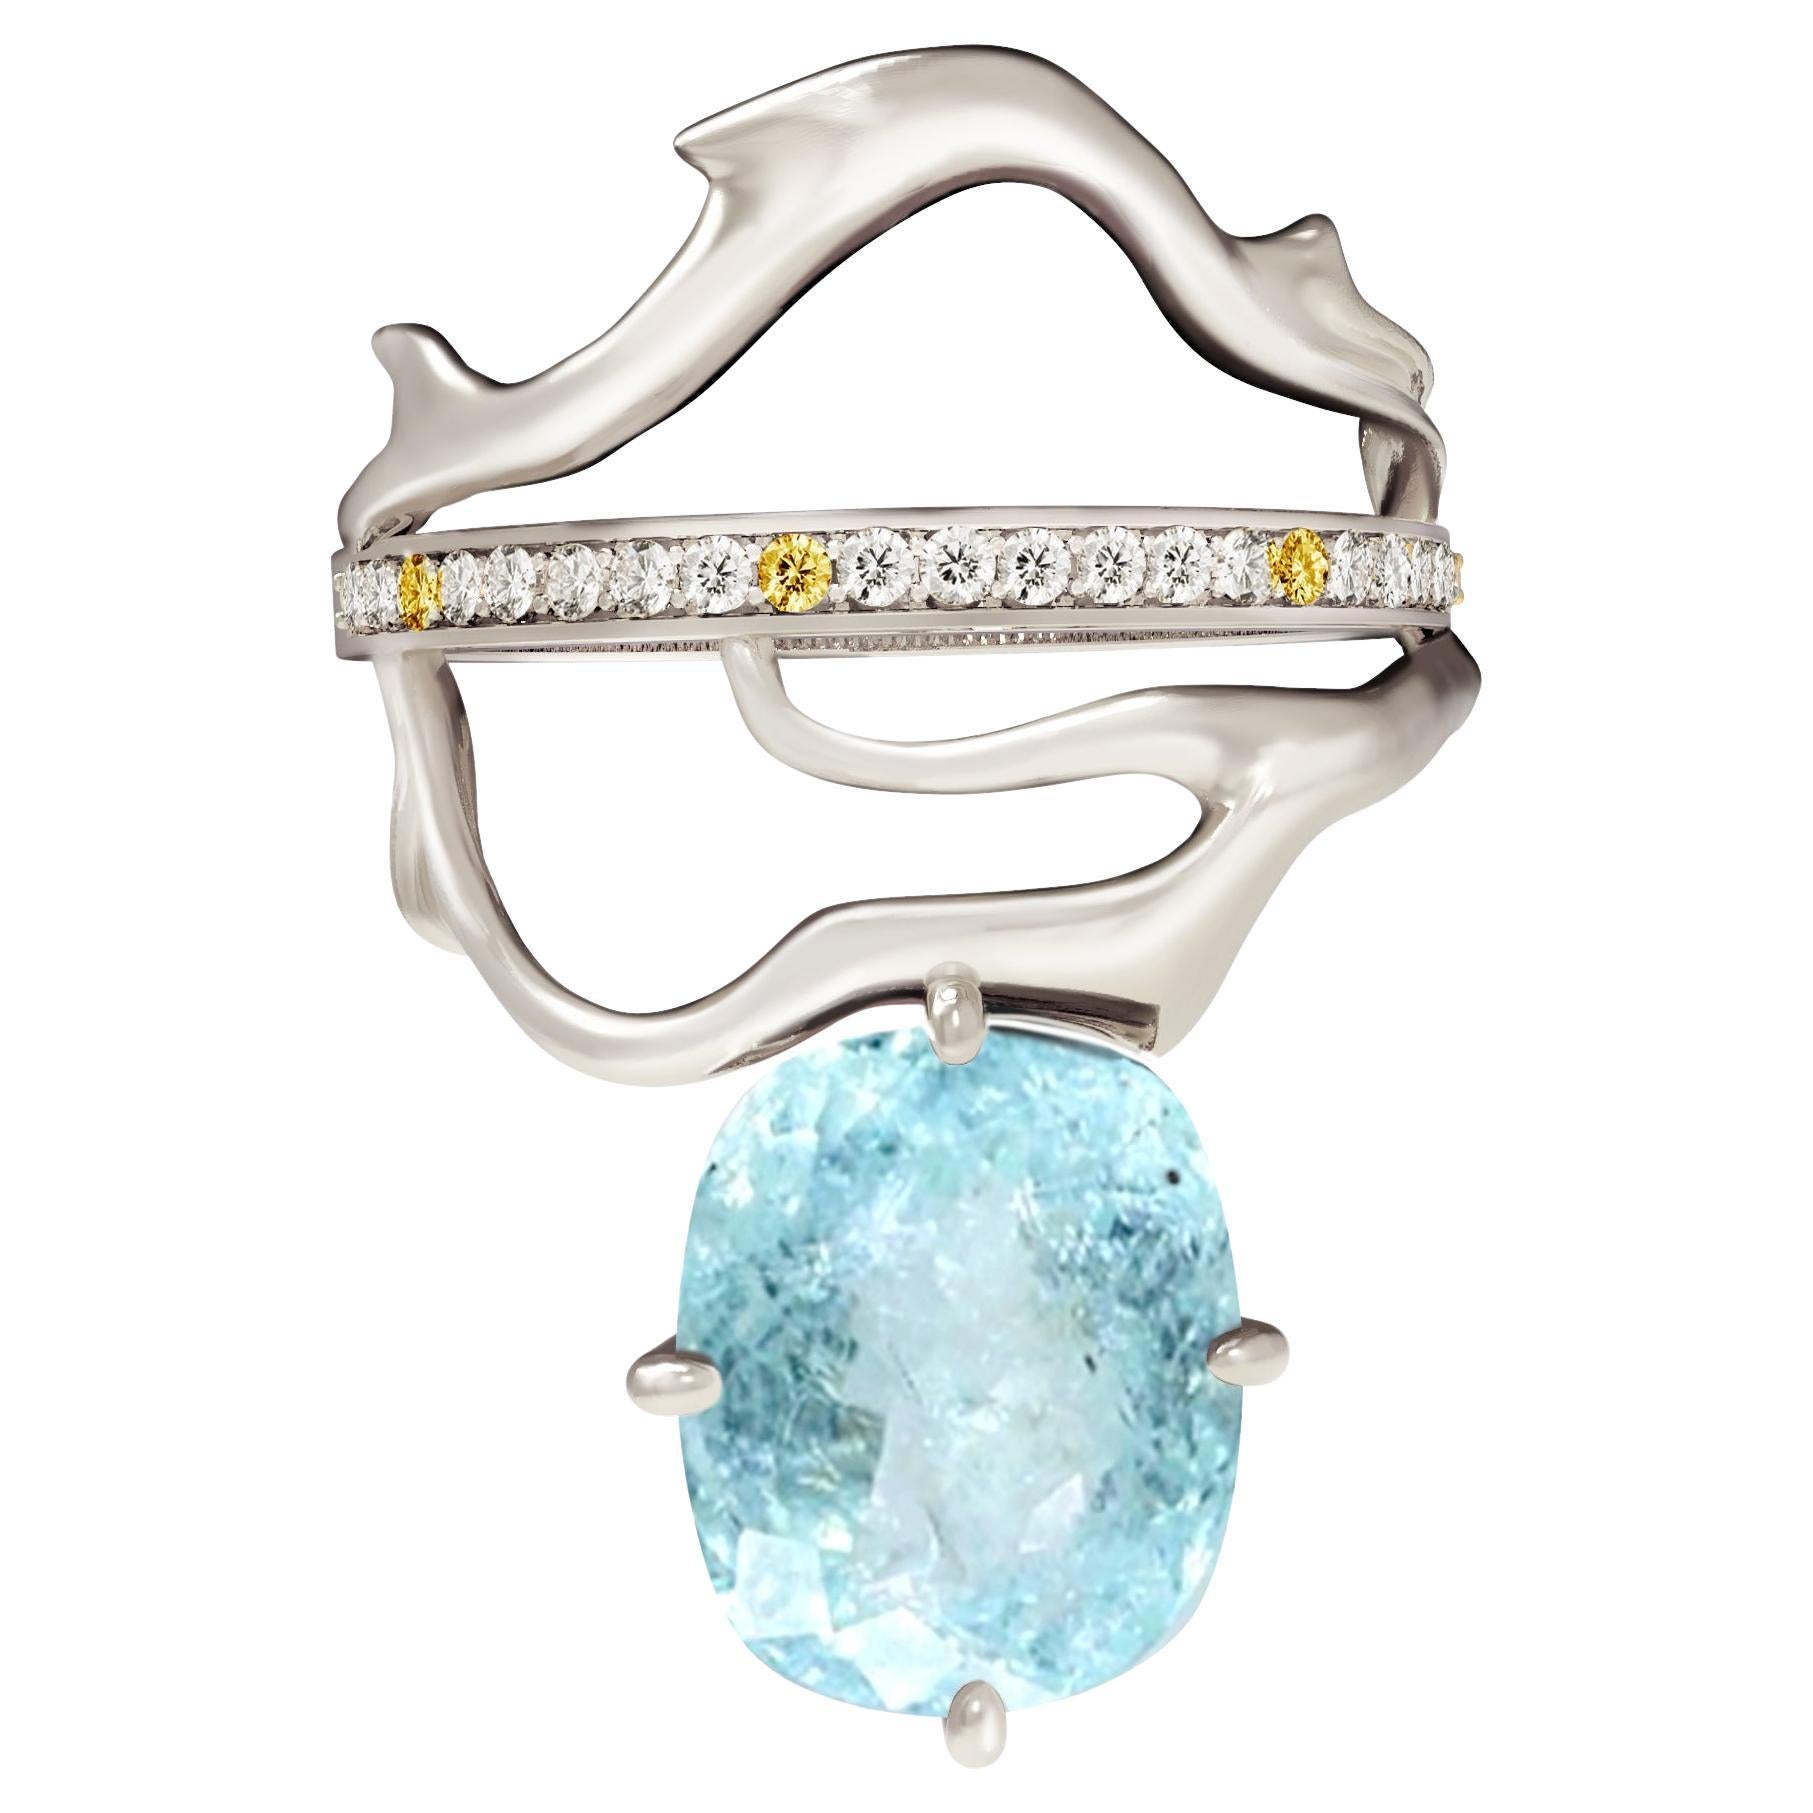 This Tibetan 18 karat white gold contemporary ring is encrusted with diamonds, yellow sapphires, and oval cut paraiba tourmaline  (neon copper bearing, 2,4 carats, blue with inclusions). Size is custom made. Can be made with different gems.
It was